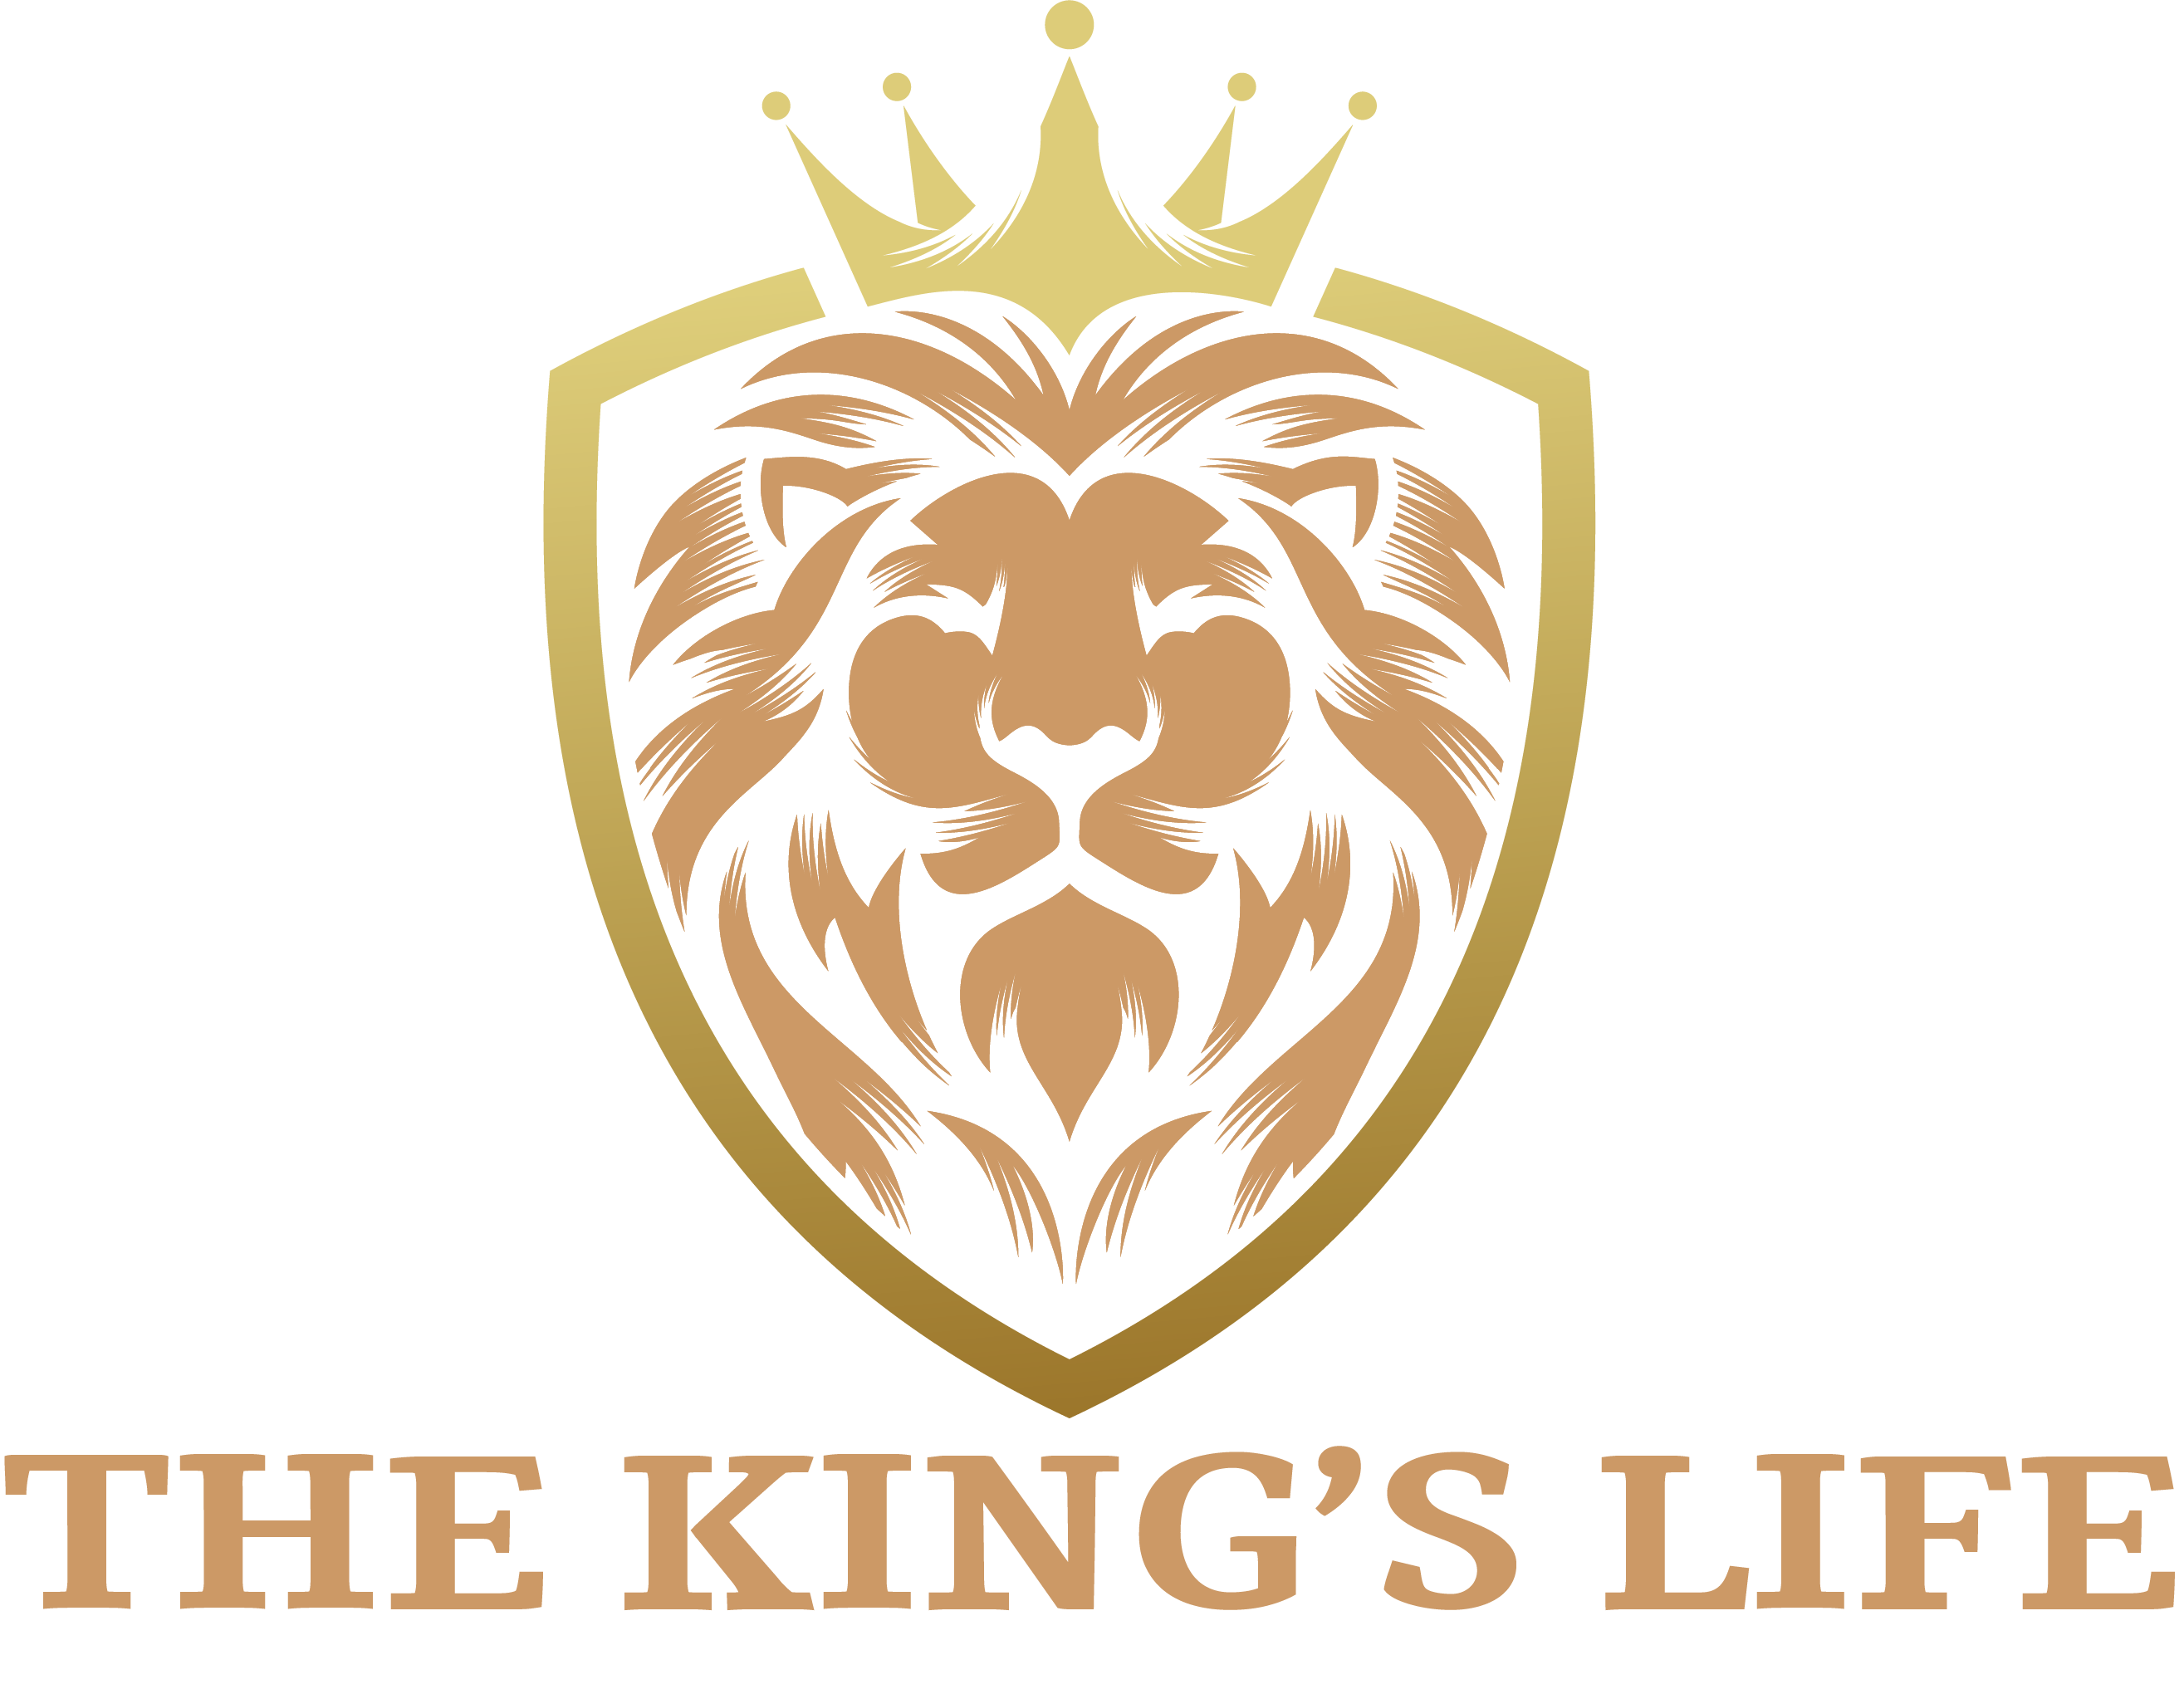   The Founder of The King's Life, Louis Casper Dunweber, introduces the $KING Token with numerous utilities.